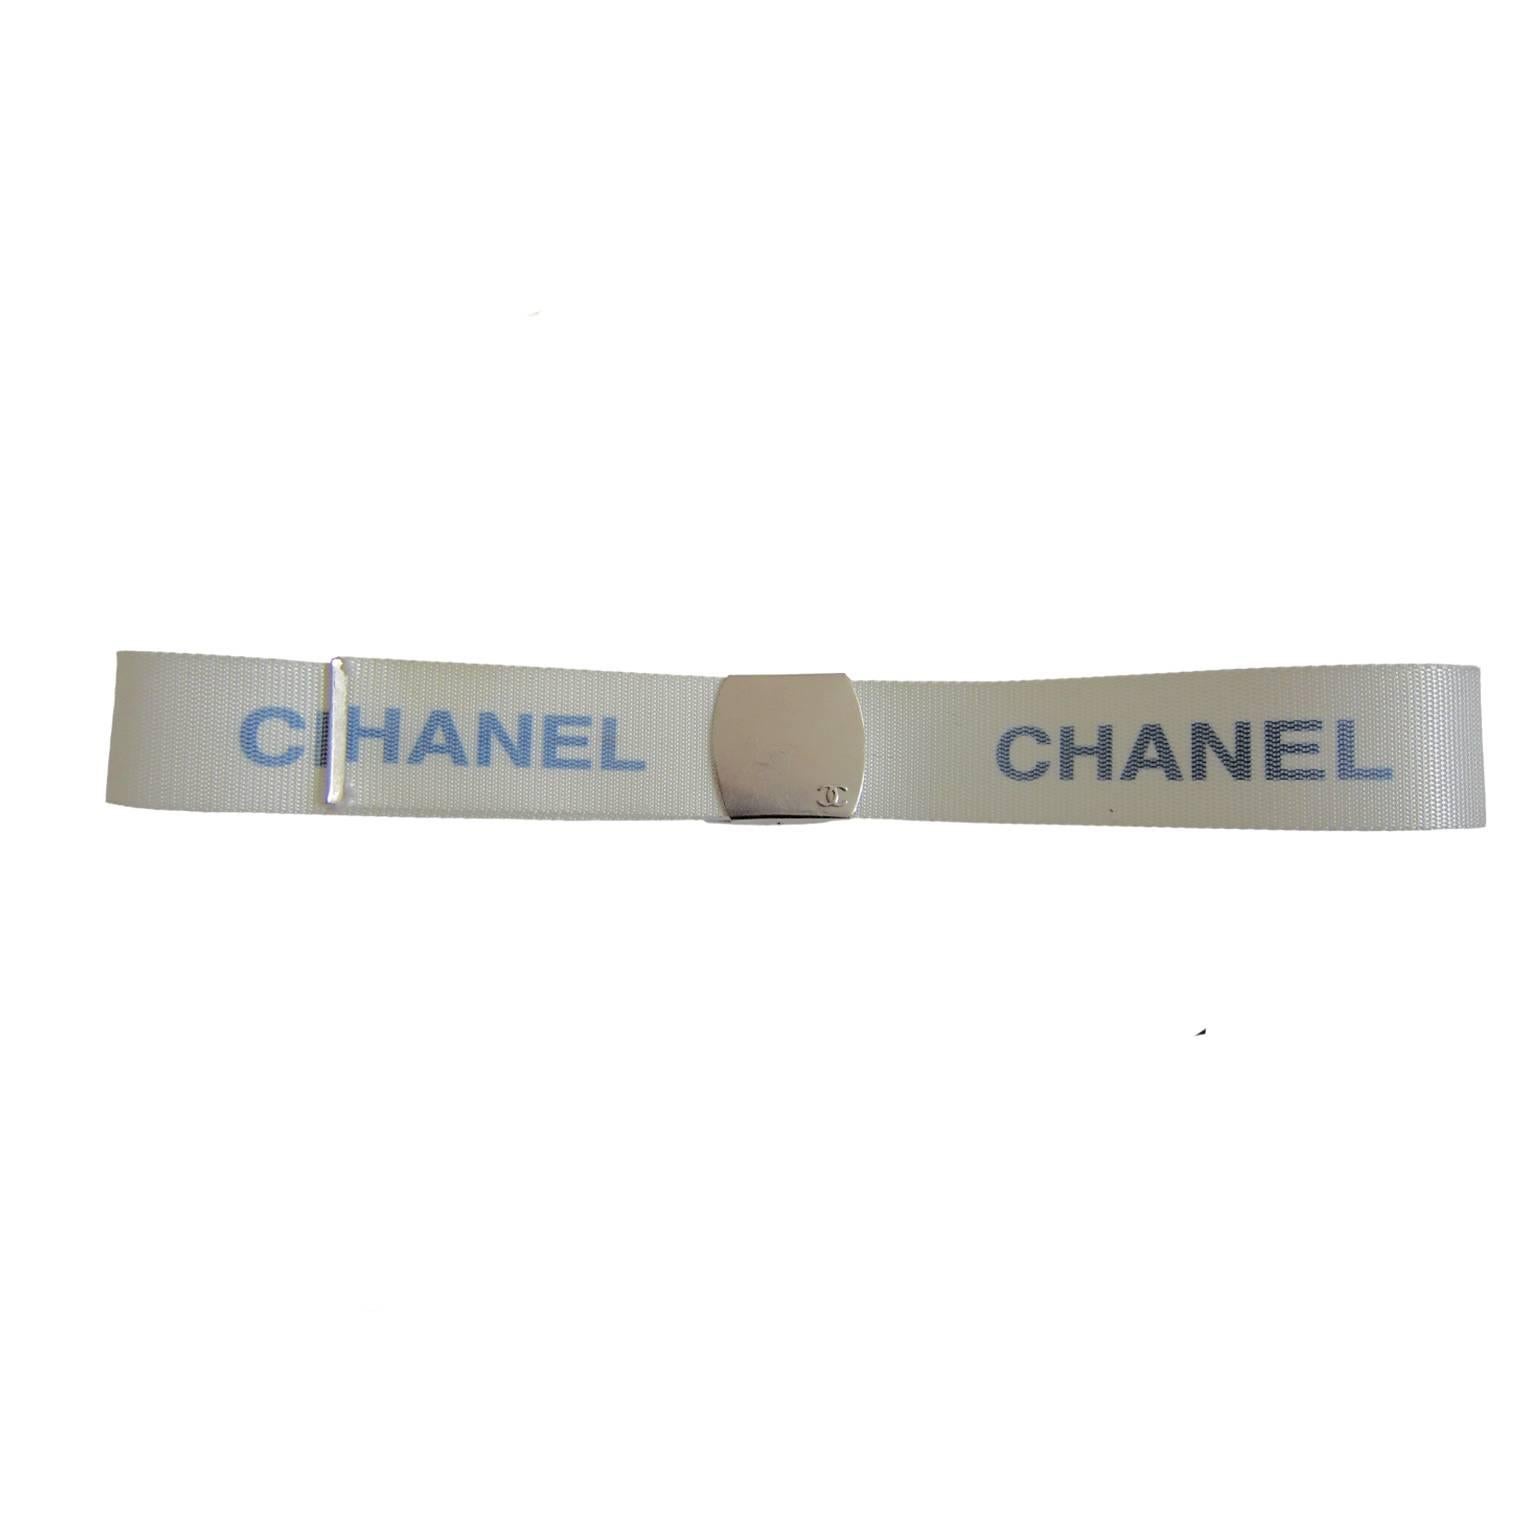 Chanel military style white nylon belt with blue logos from circa 90s. Silver tone metal logo buckleIt, can be adjusted to fit any waist size. 
Total length with buckle : 85. 5 cm